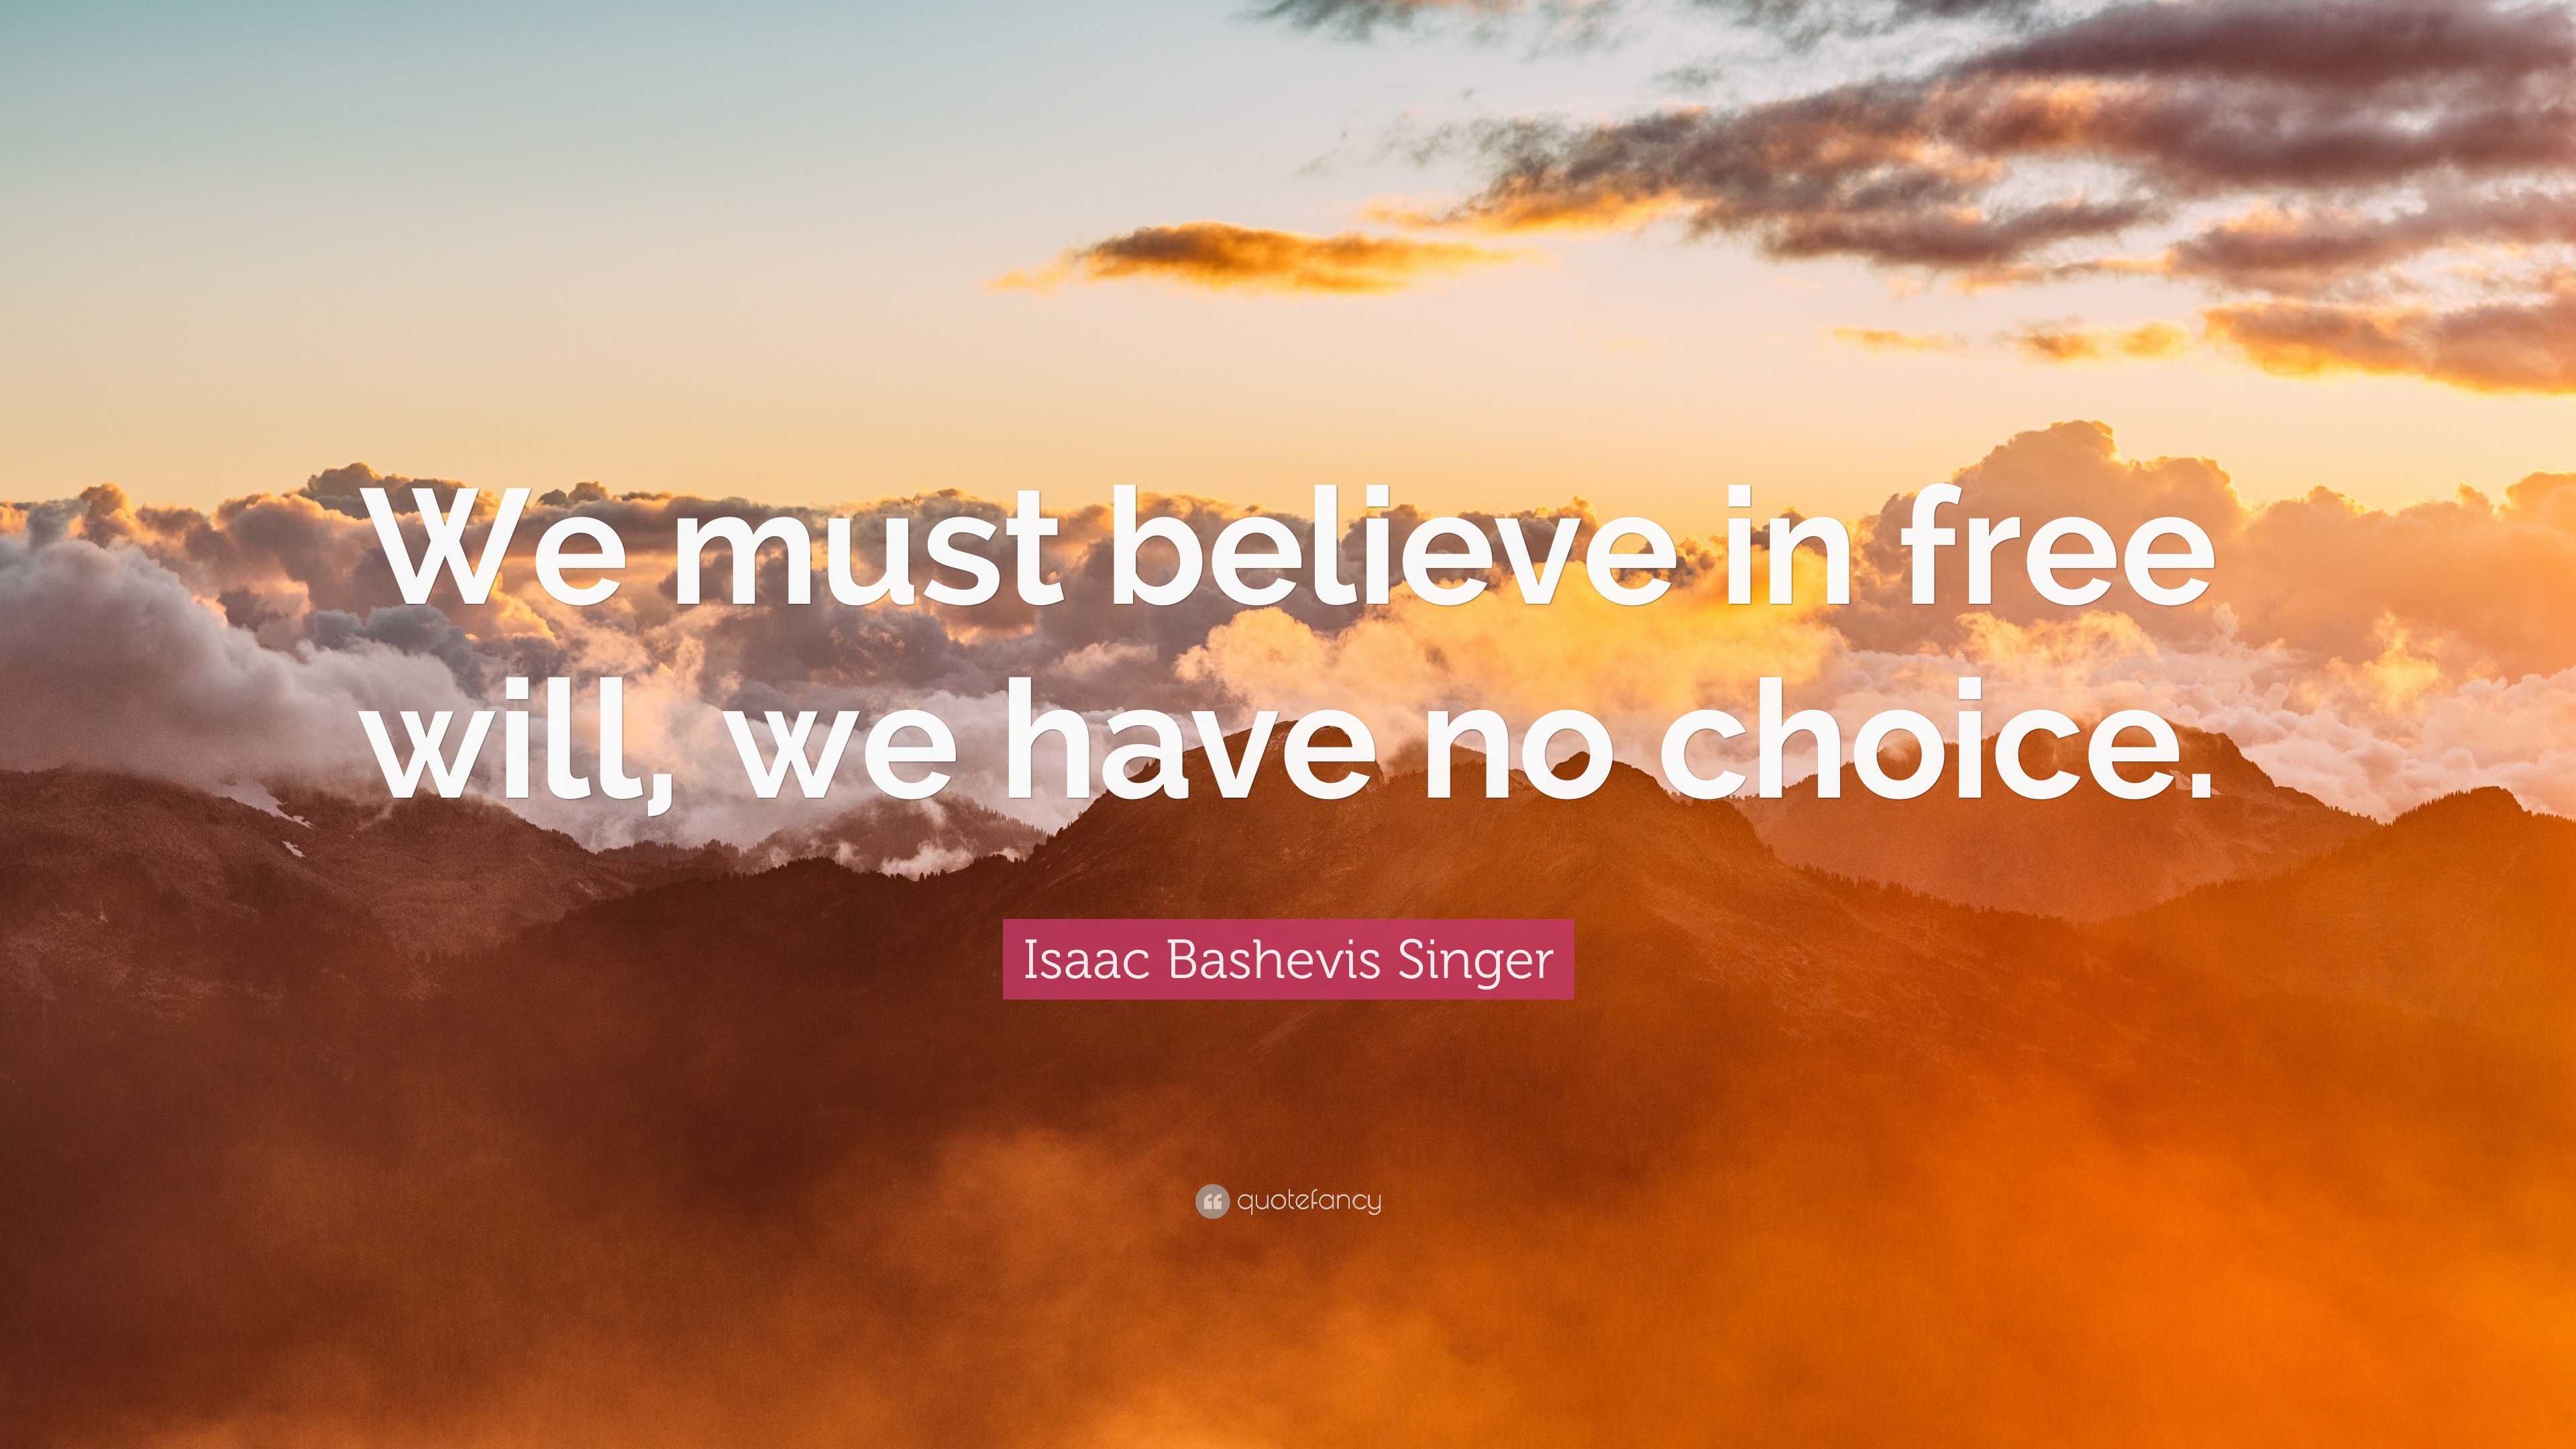 Top 120 Isaac Bashevis Singer Quotes (2023 Update) - Quotefancy